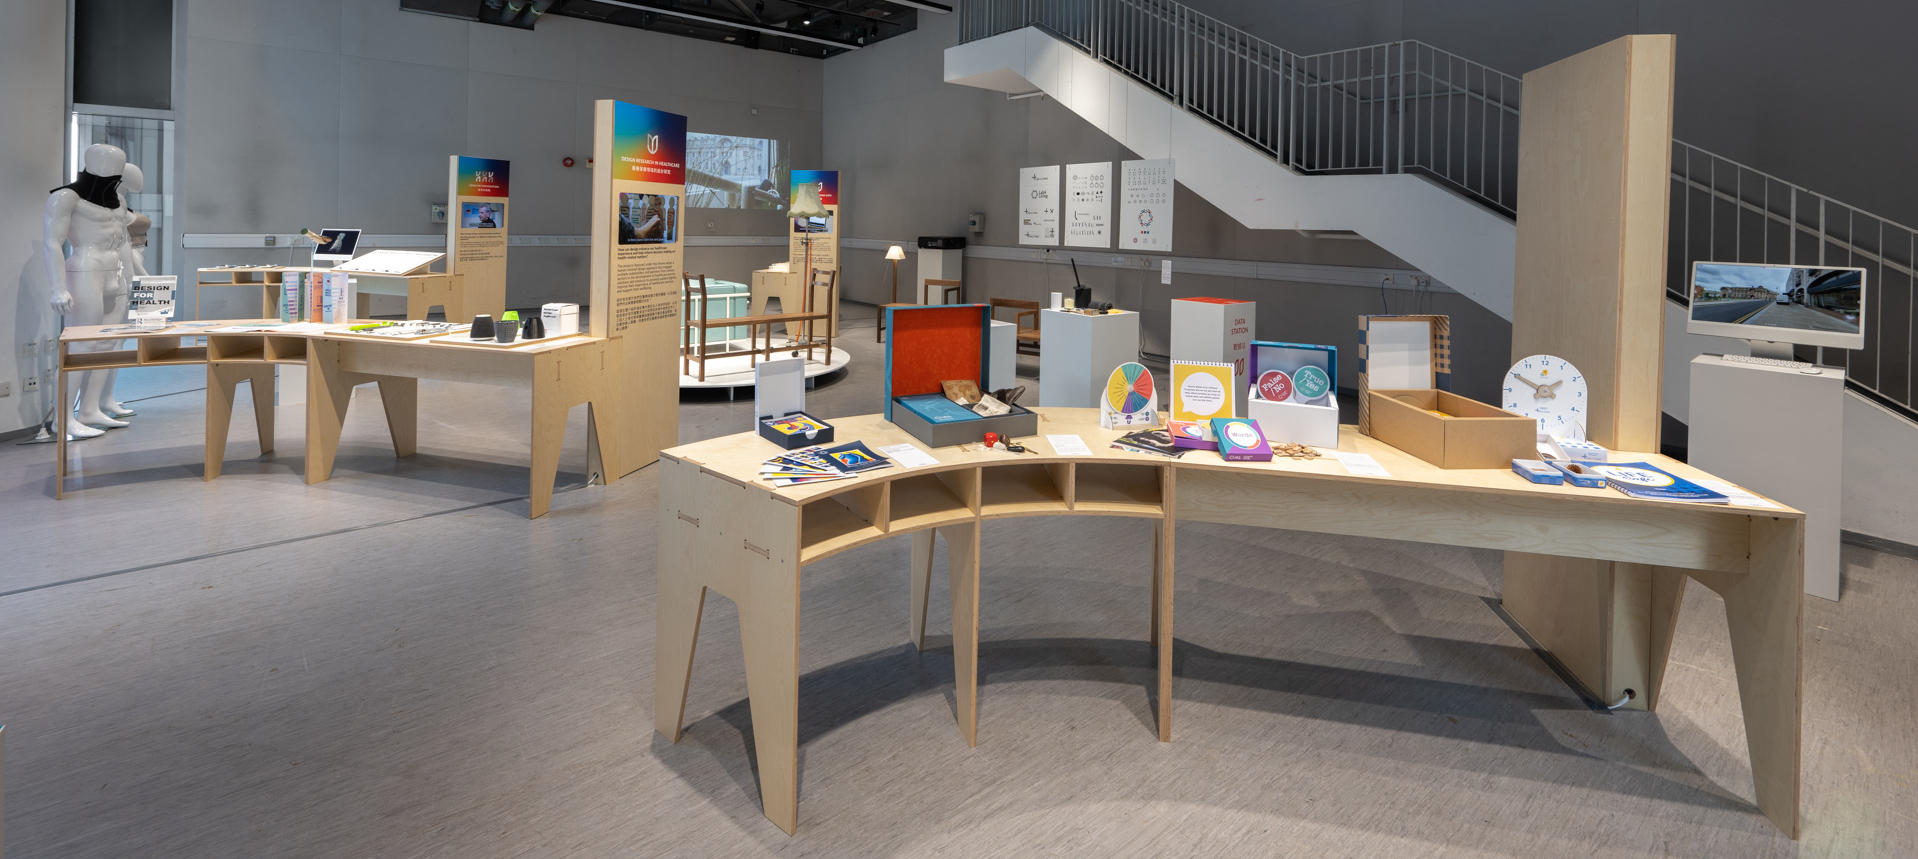 Beyond 100 exhibition opens at Hong Kong Design Institute